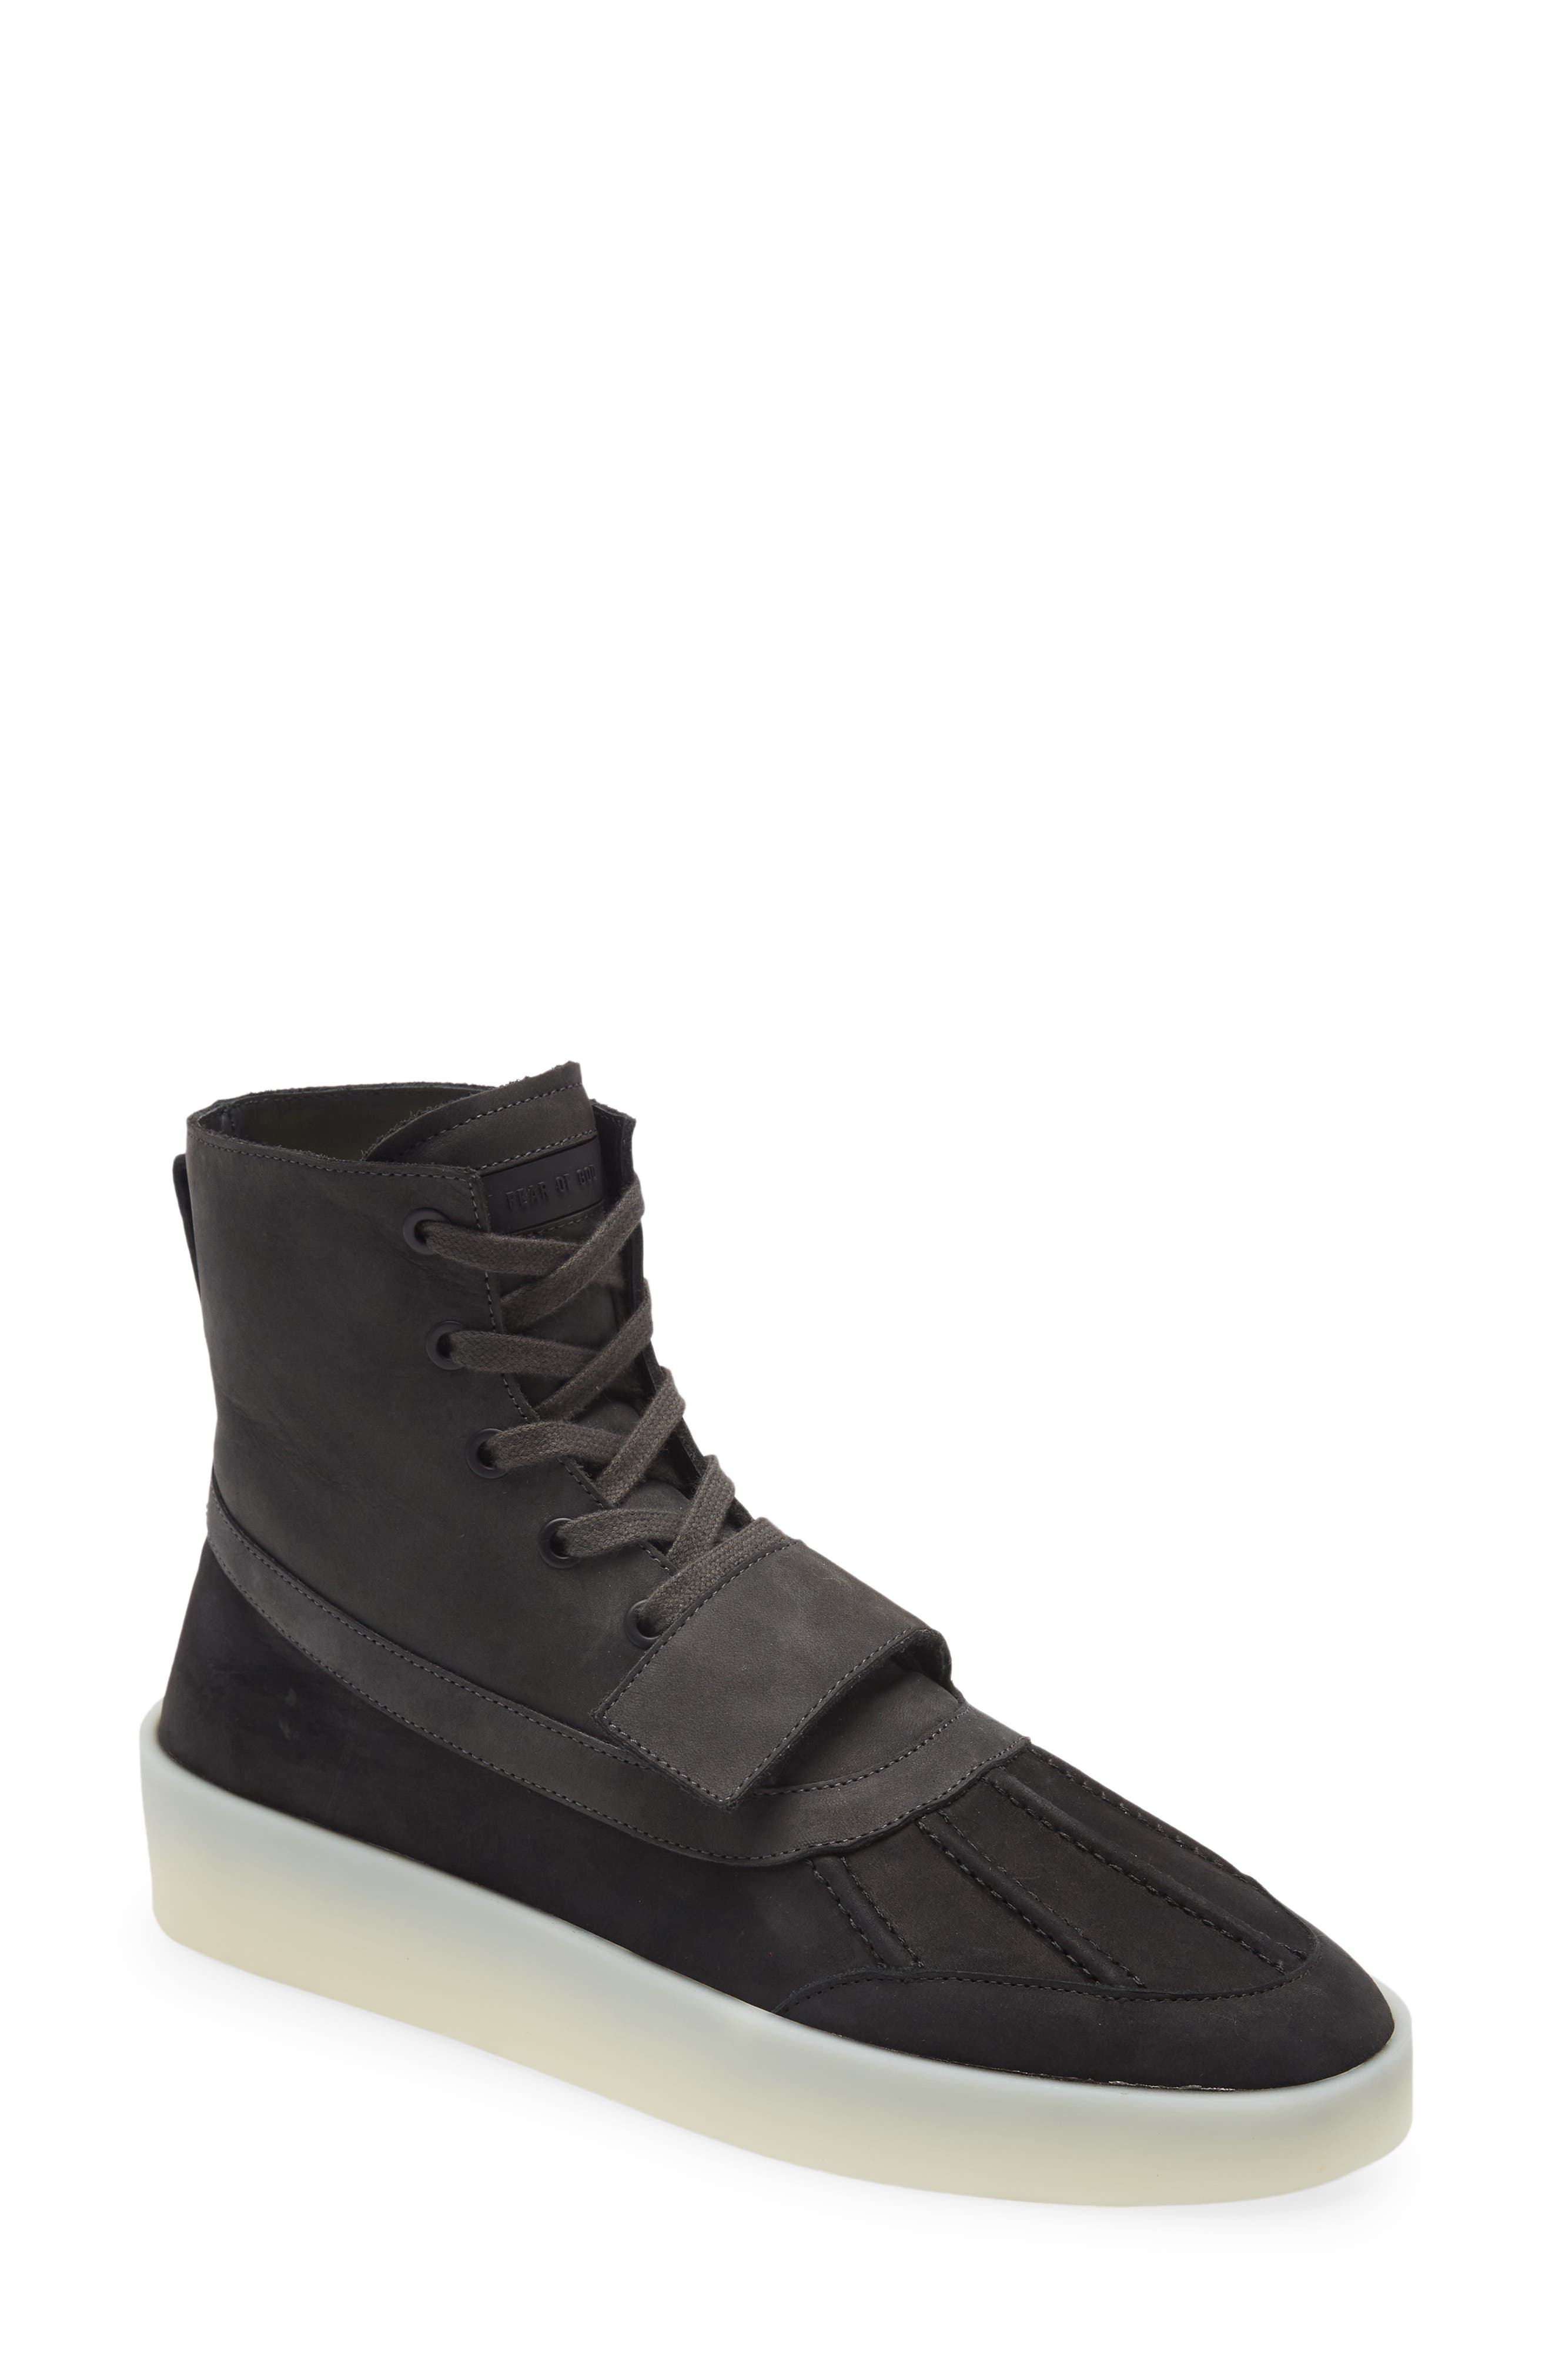 Fear of God Duck Boot in Off Black/Black at Nordstrom, Size 11W-12Us